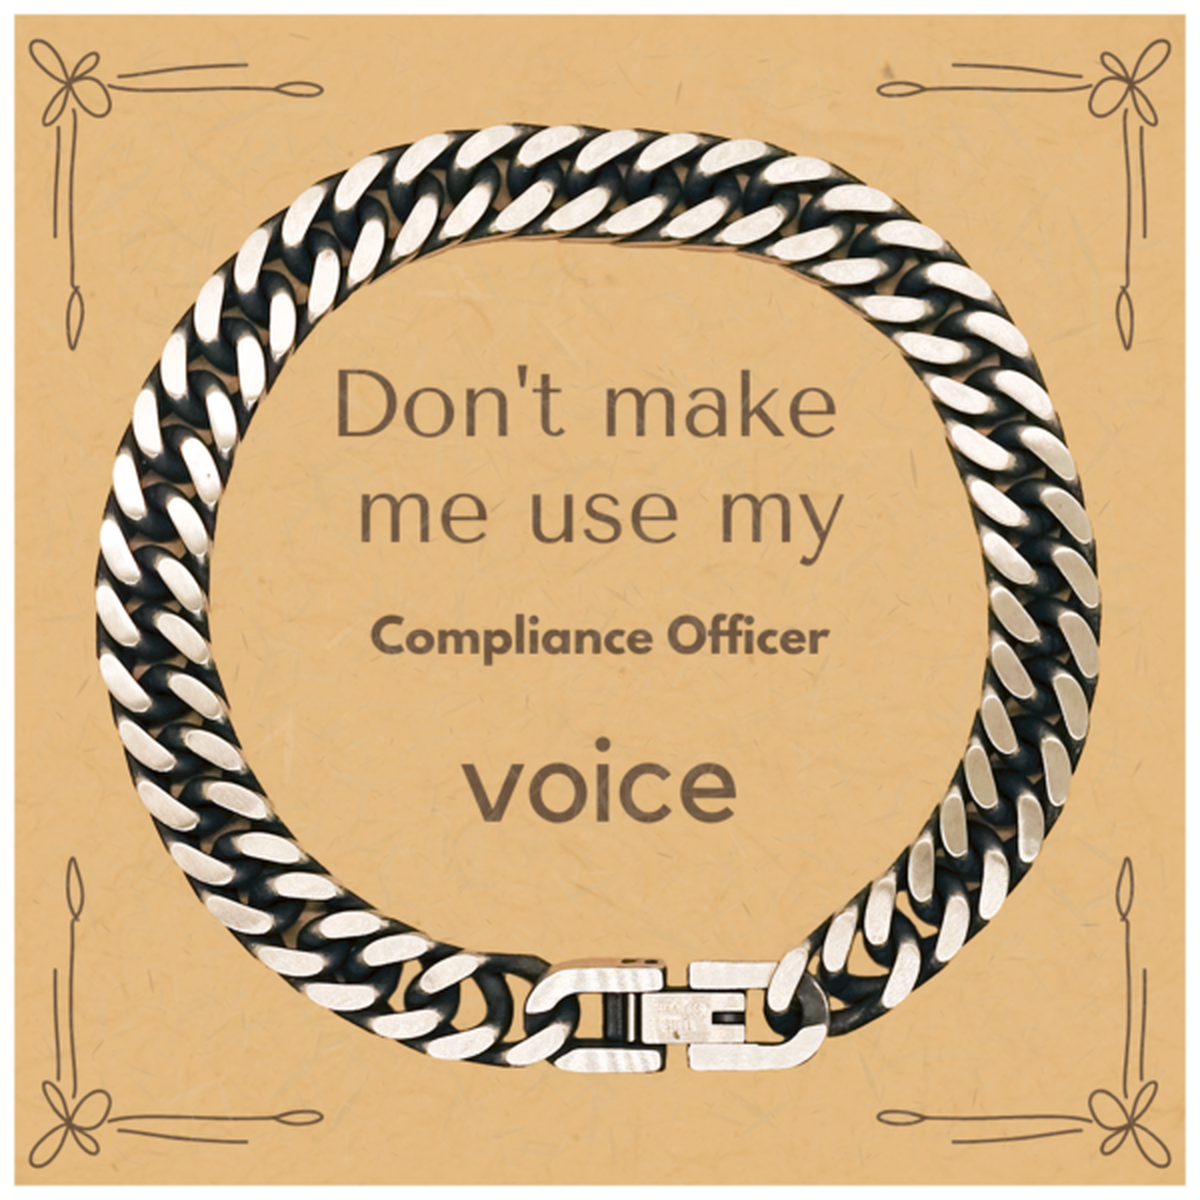 Don't make me use my Compliance Officer voice, Sarcasm Compliance Officer Card Gifts, Christmas Compliance Officer Cuban Link Chain Bracelet Birthday Unique Gifts For Compliance Officer Coworkers, Men, Women, Colleague, Friends